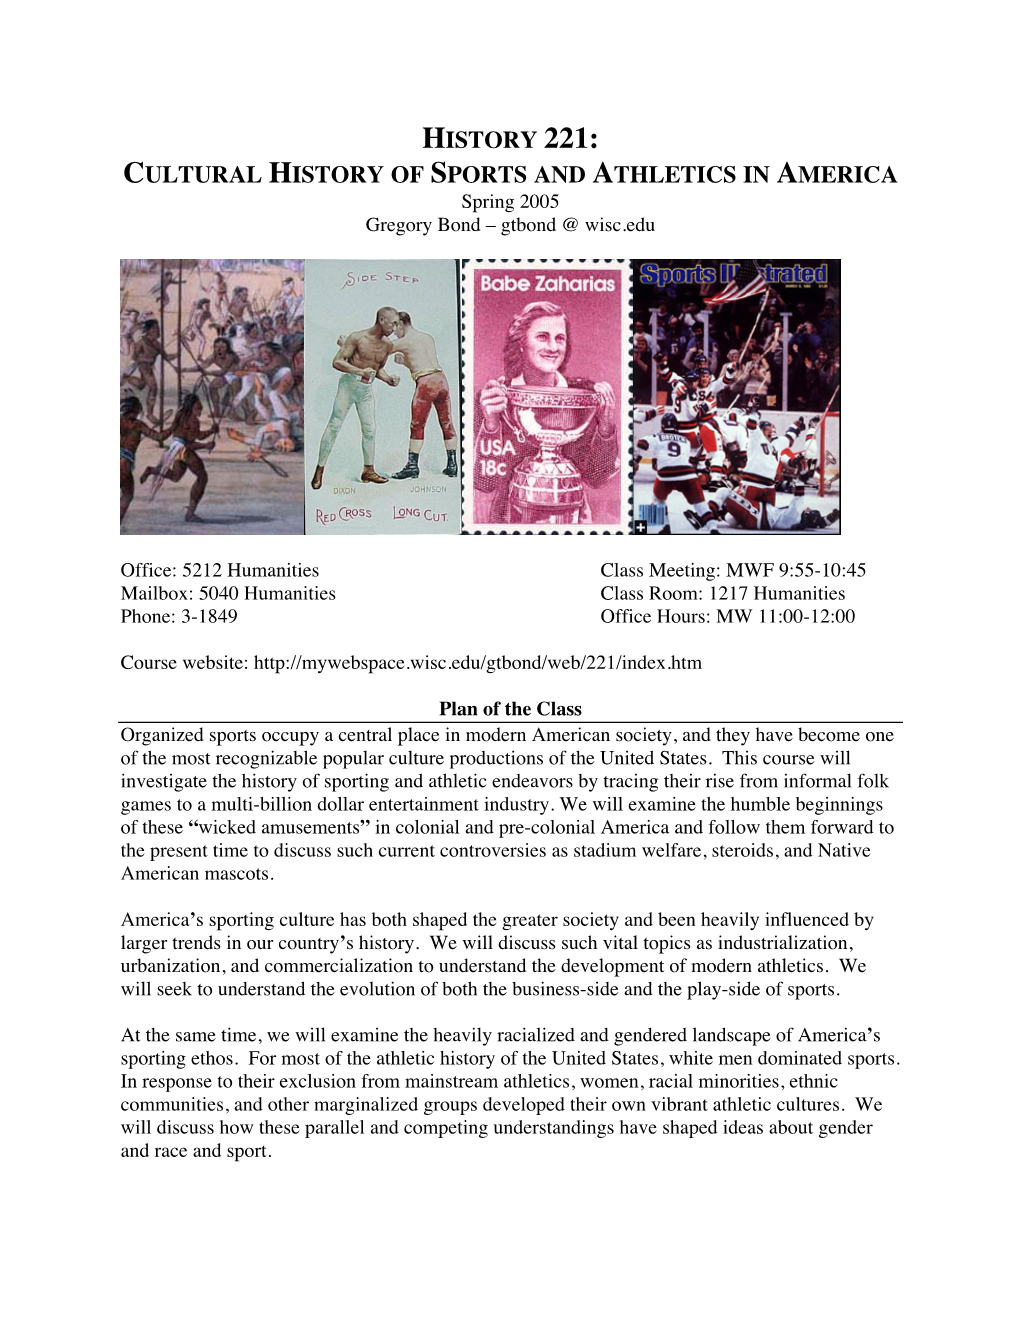 CULTURAL HISTORY of SPORTS and ATHLETICS in AMERICA Spring 2005 Gregory Bond – Gtbond @ Wisc.Edu